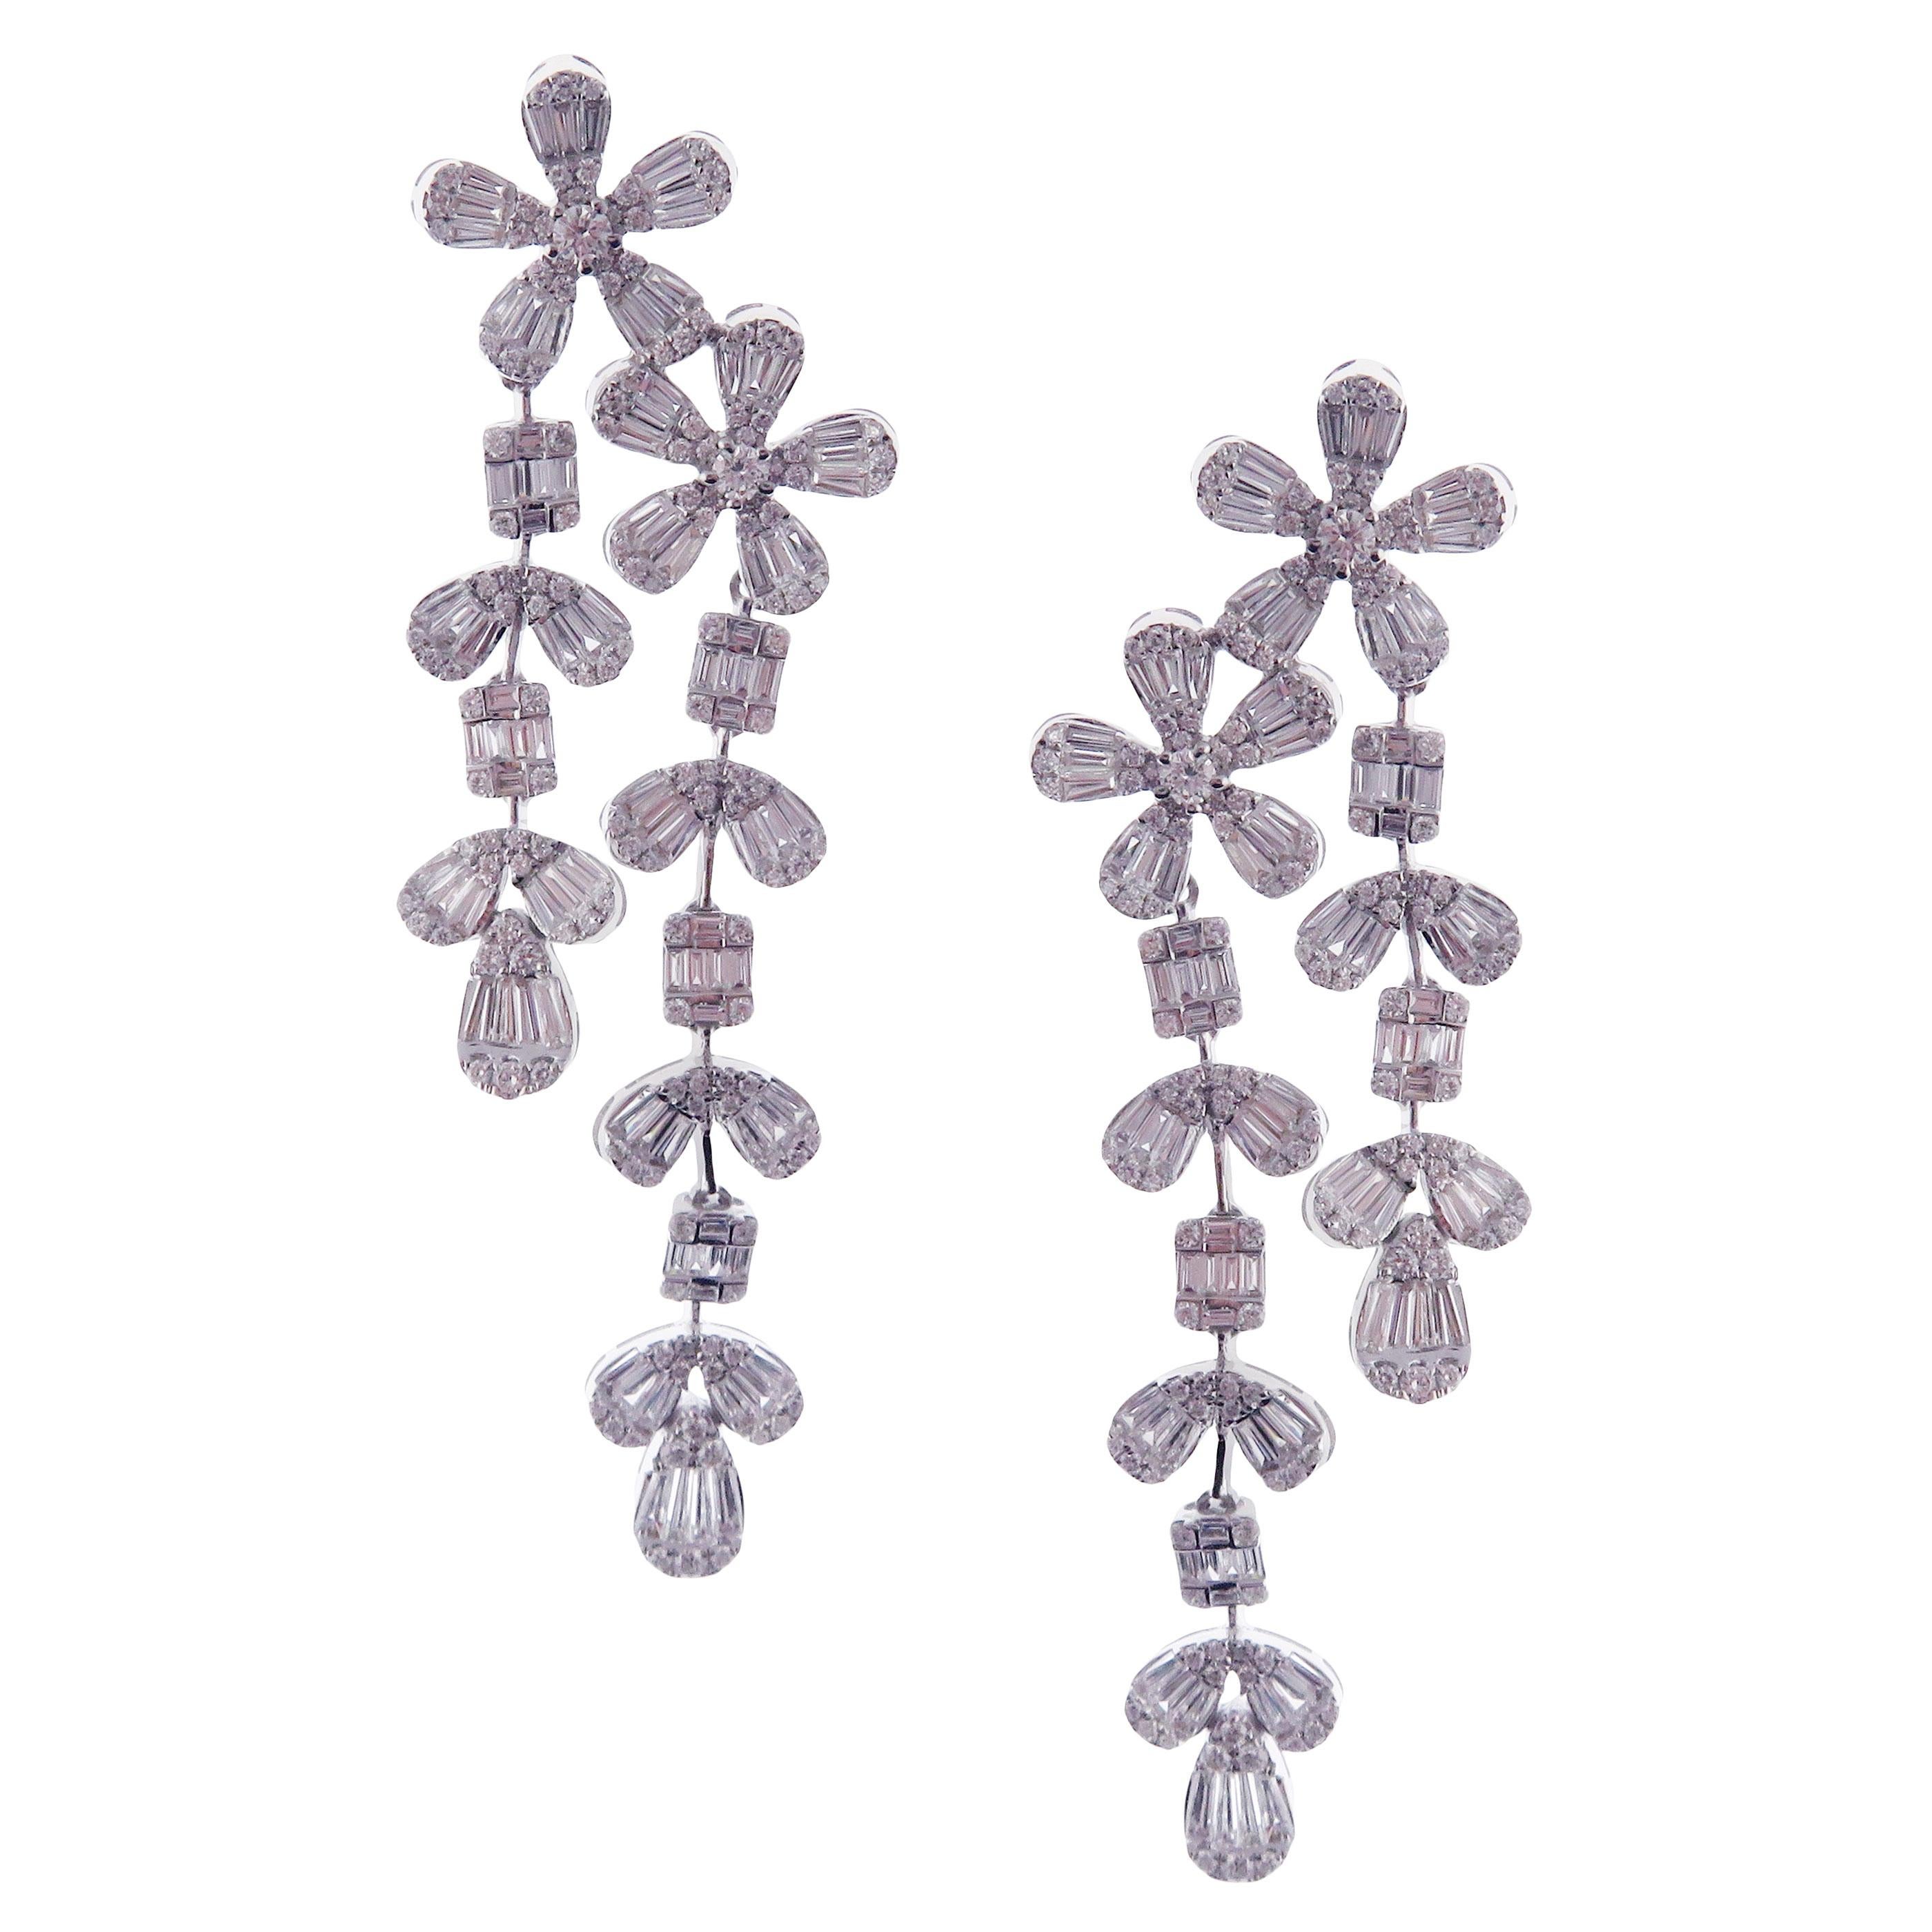 These trendy multi shapes flower waterfall dangling earrings with illusion setting round and baguette white diamonds are crafted in 18-karat white gold, featuring 308 round white diamonds totaling of 2.20 carats and 196 baguette white diamonds